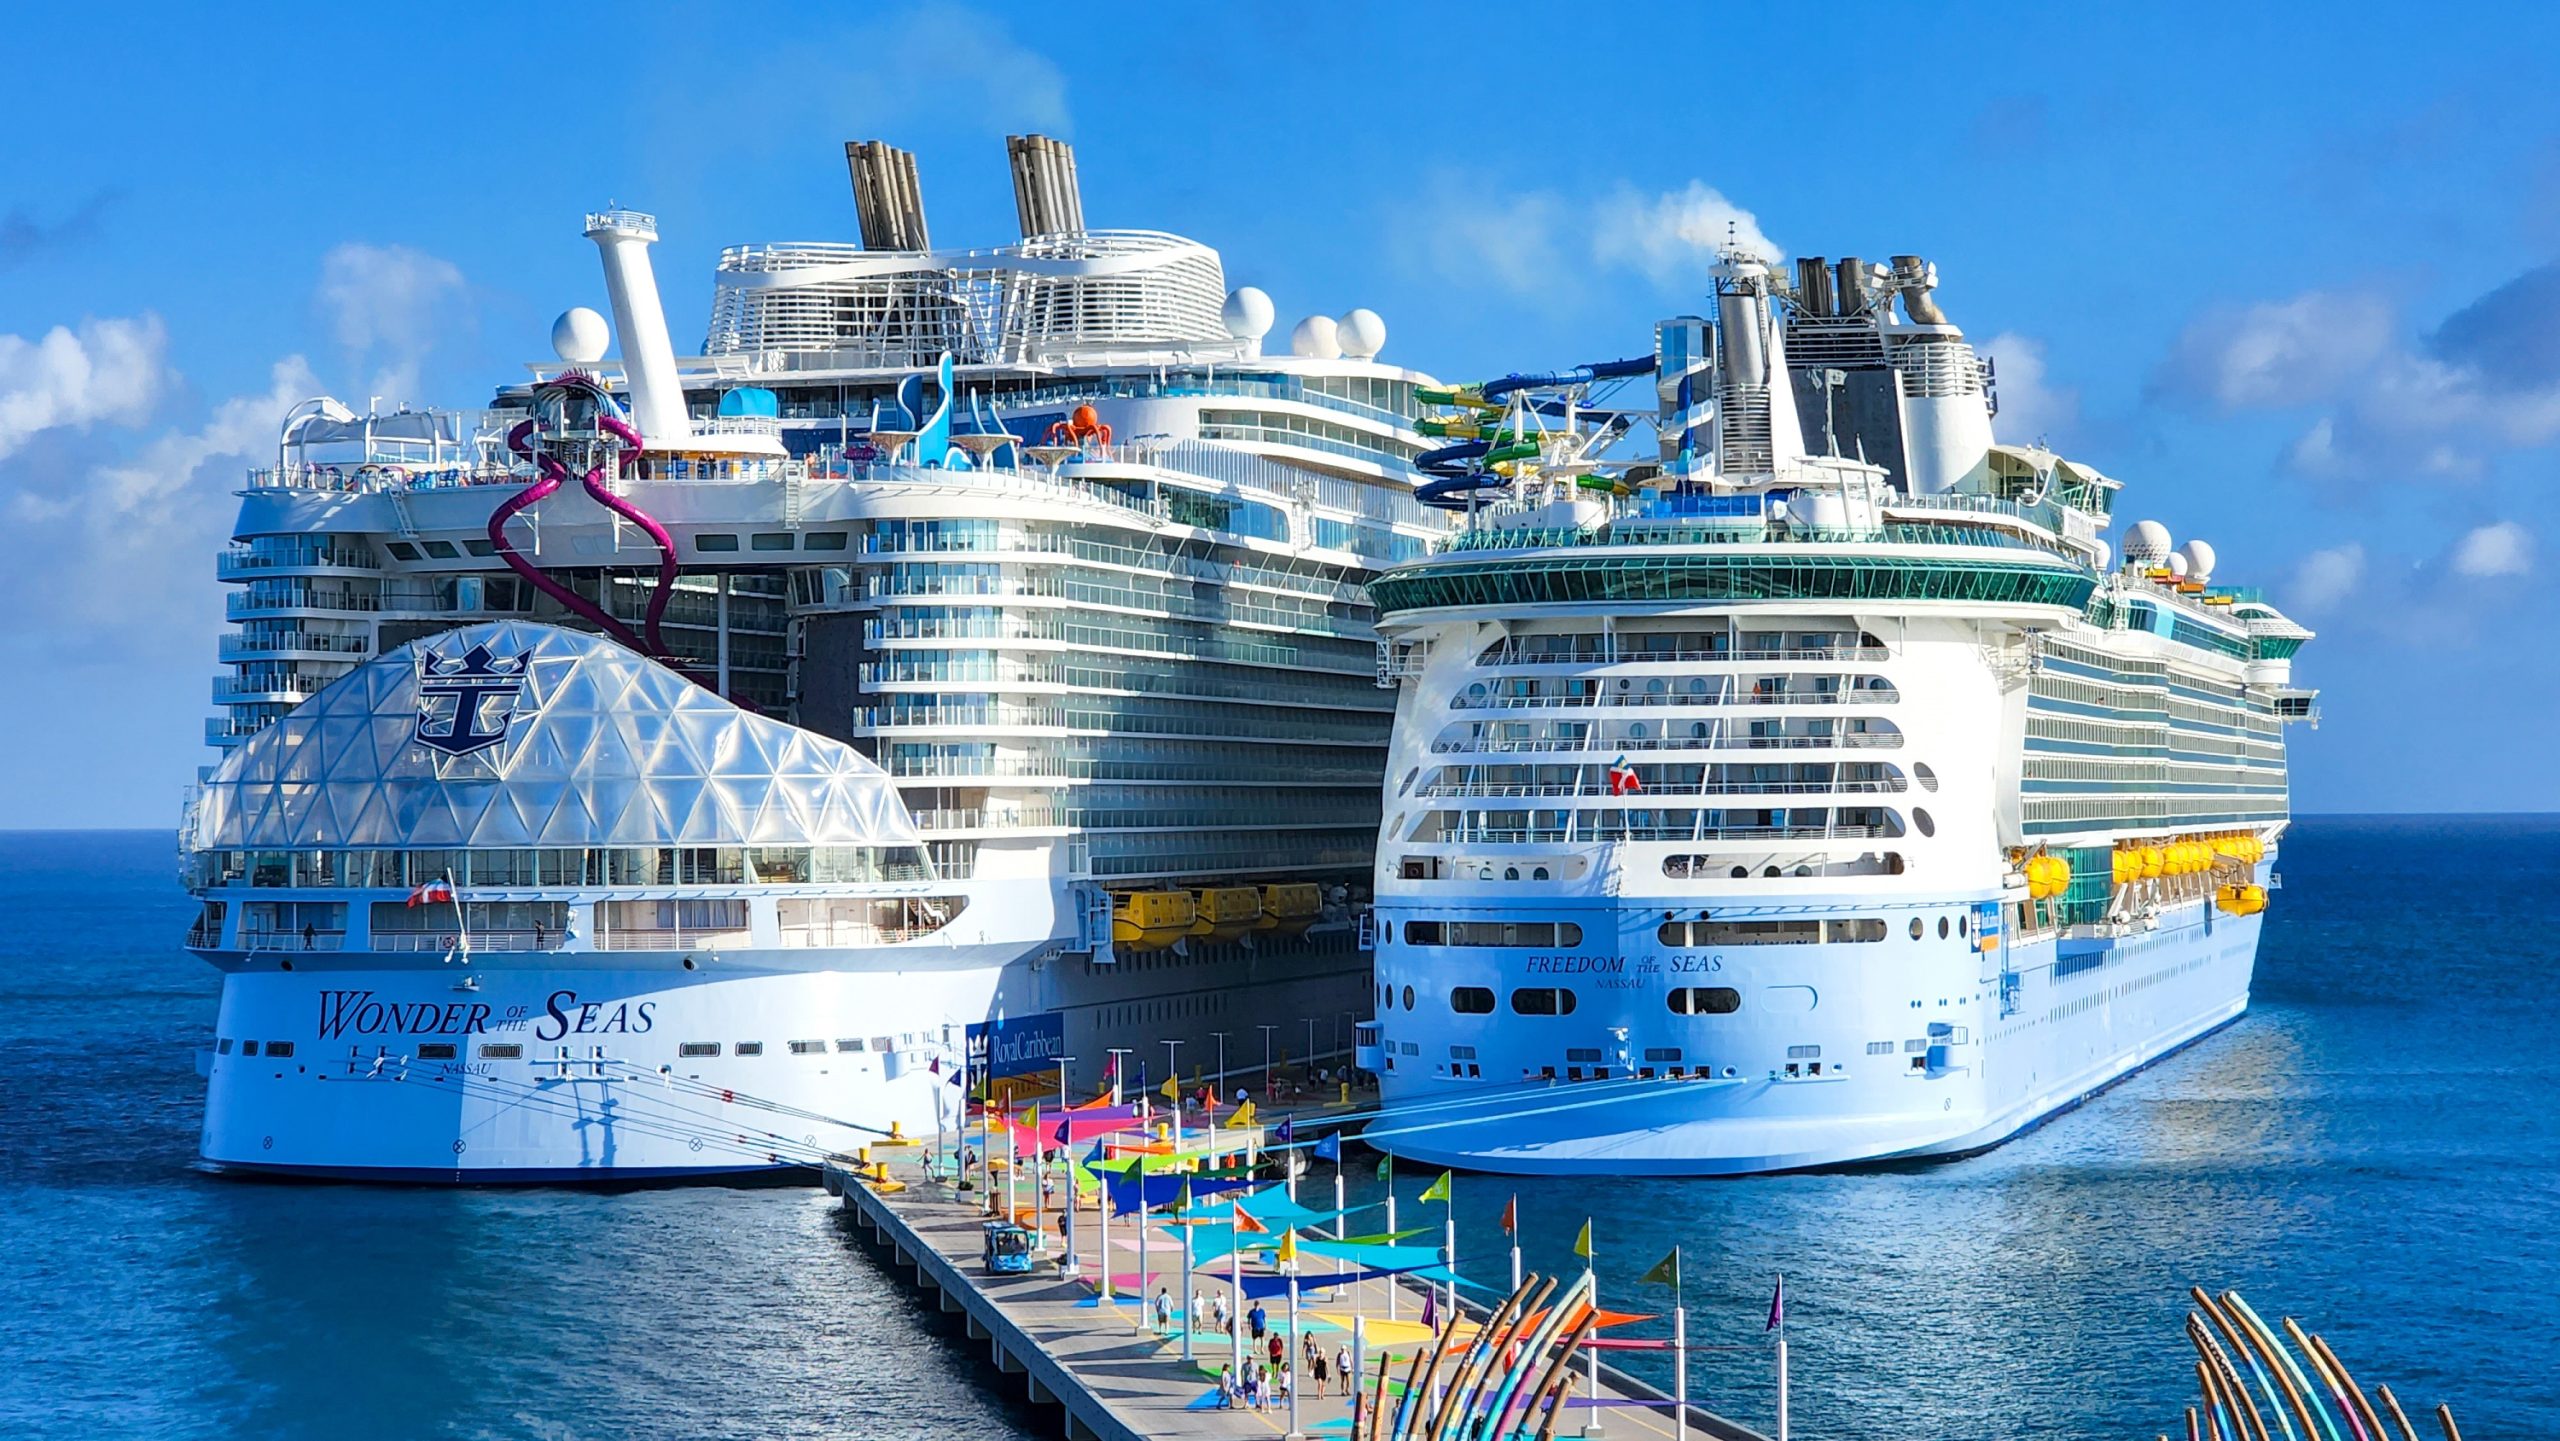 A Voyage Across Royal Caribbean's Fleet, Newest to Oldest